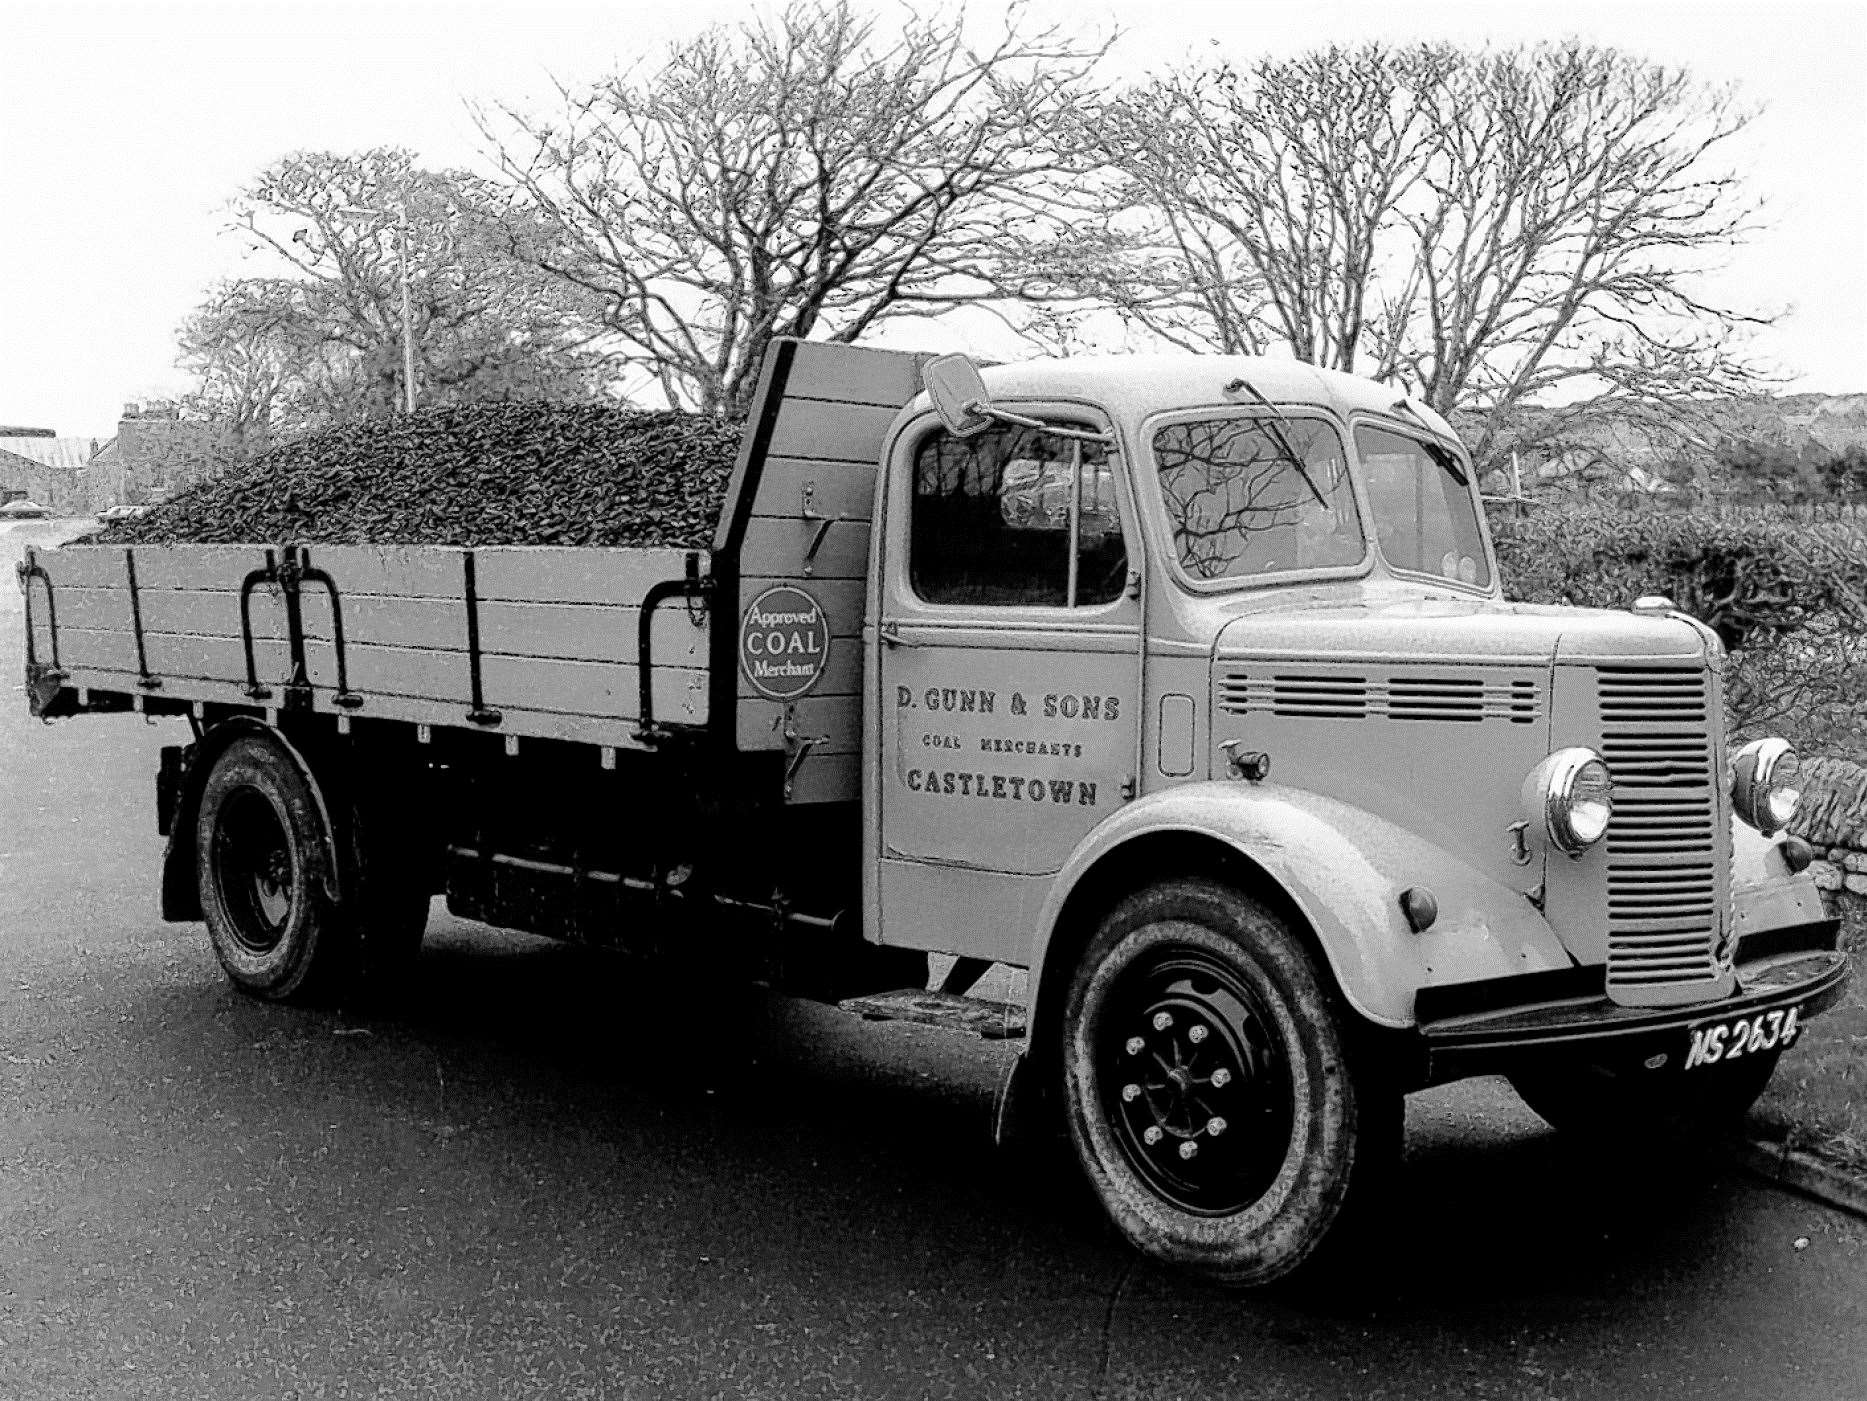 A familiar sight in the Castletown area in years gone by – a coal lorry belonging to D Gunn & Sons that helped to keep the home fires burning. The picture is thought to have been taken in the 1950s.